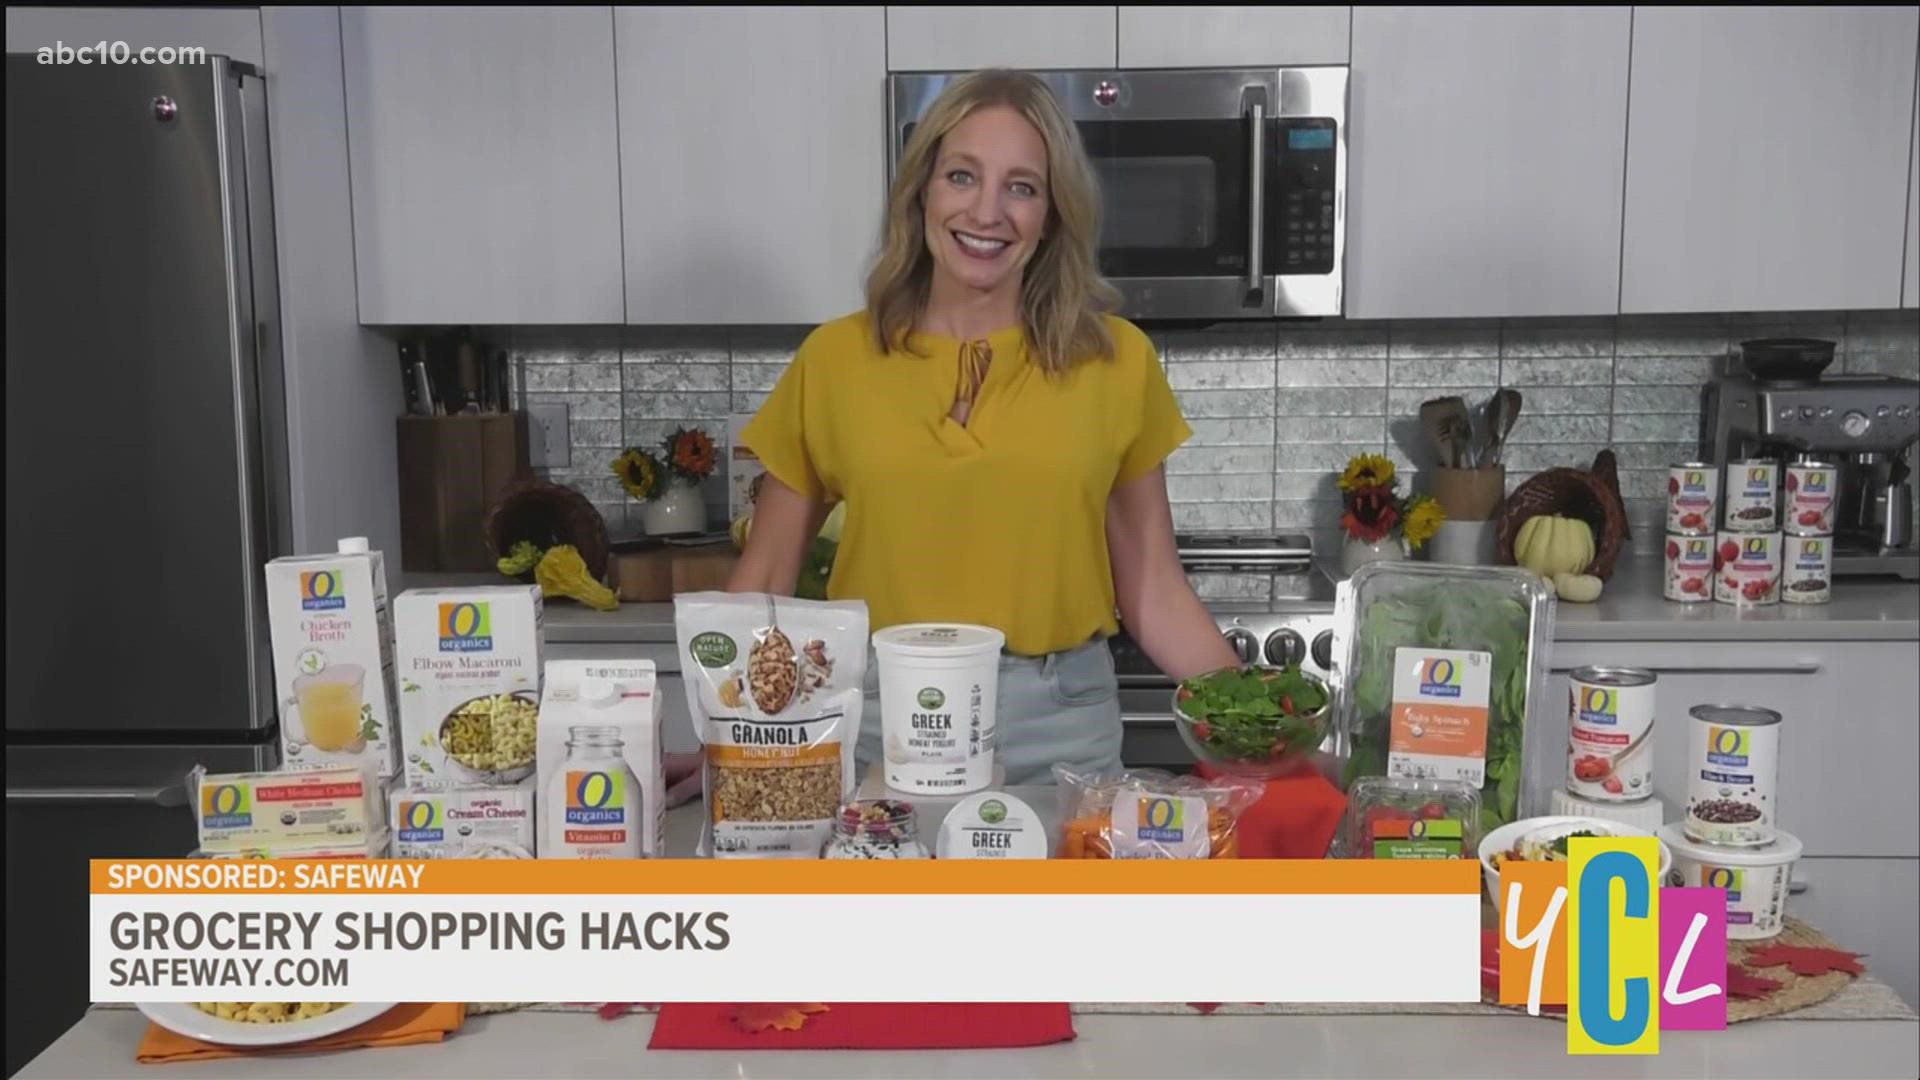 Learn a few tips, tricks and hacks to shop smarter while saving time and money on your next grocery run. This segment paid for by Safeway.